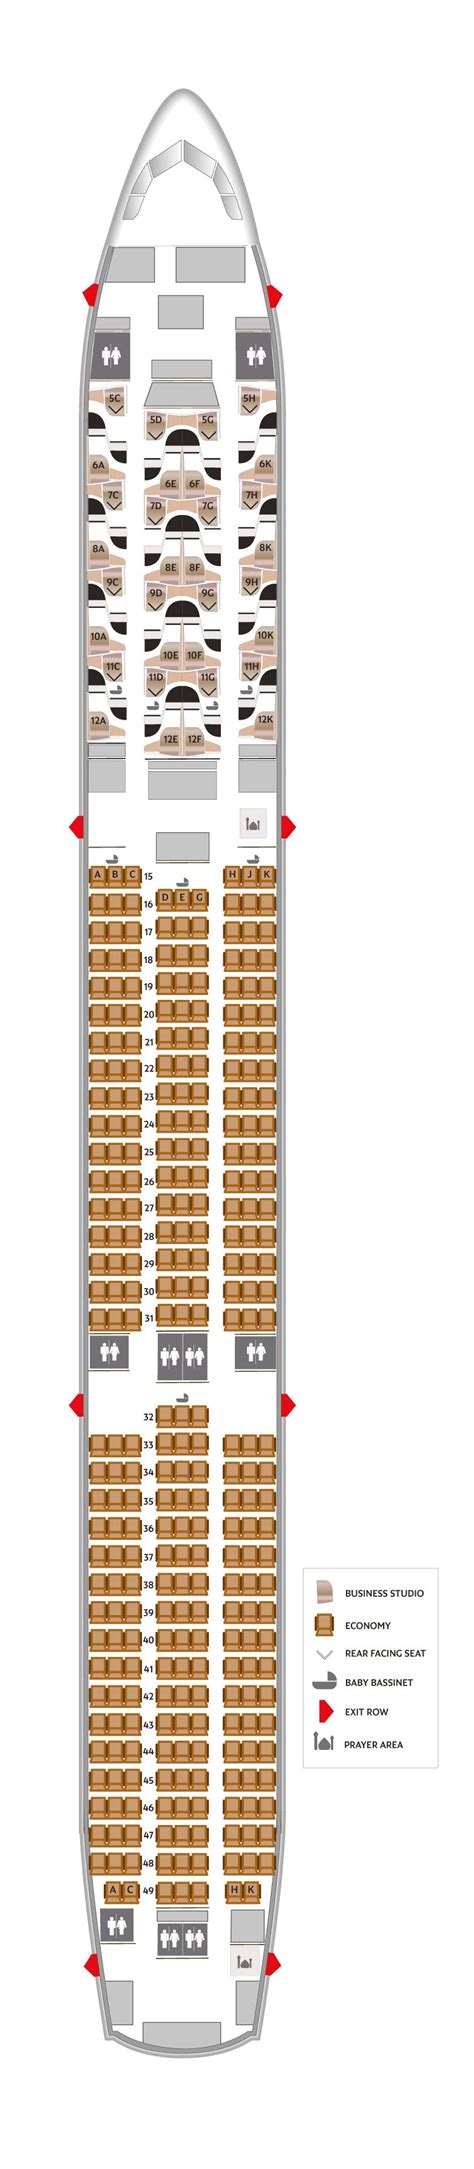 seat map and seating chart boeing dreamliner etihad airways 48734 hot sex picture